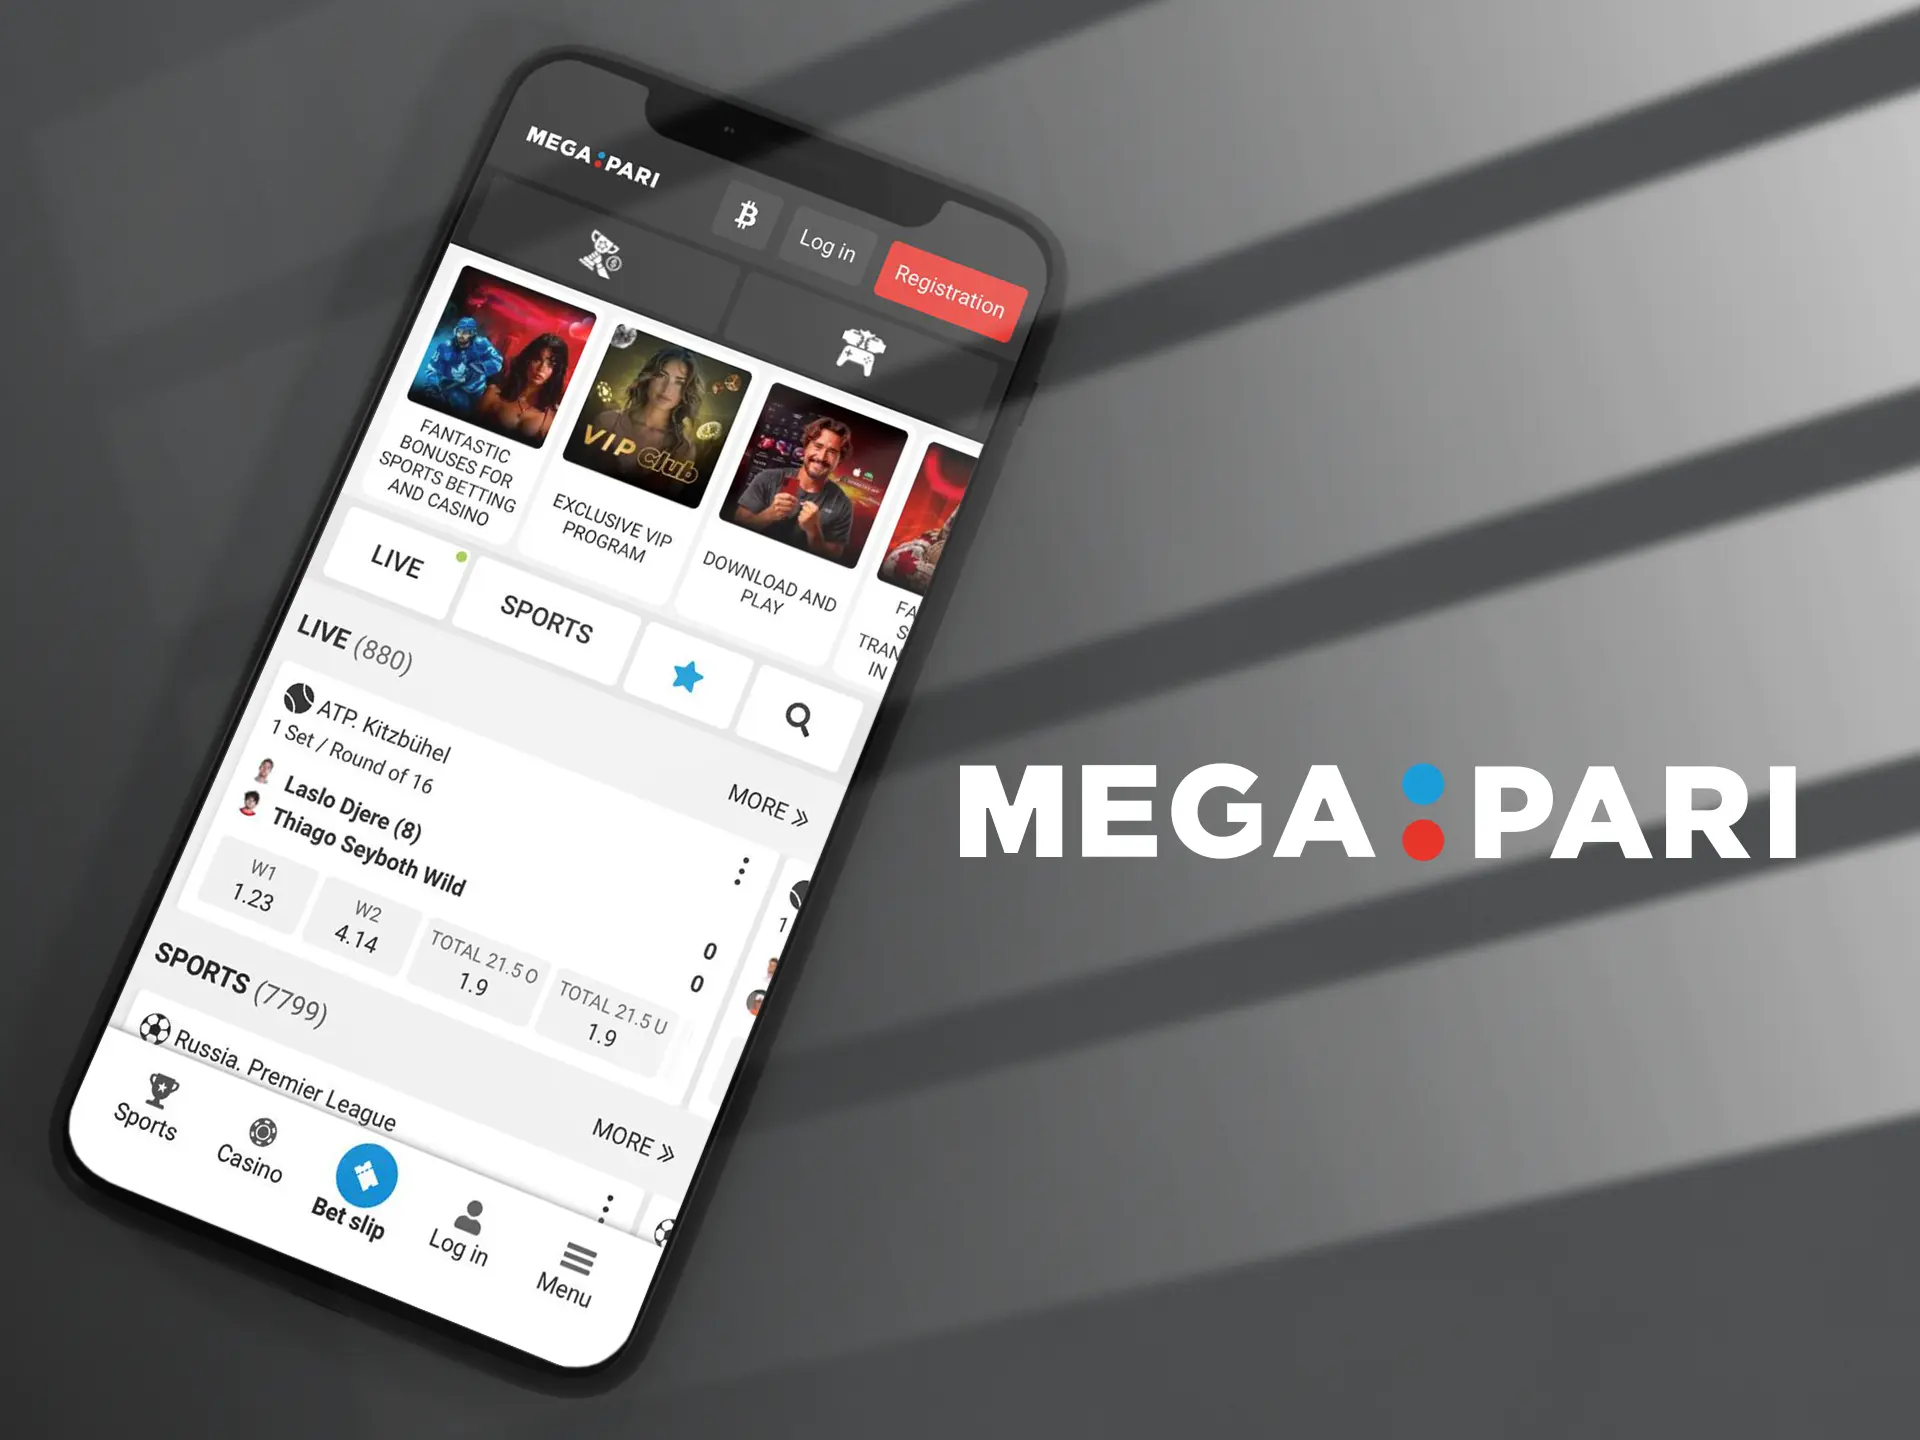 The Megapari app has a simple interface and is great for any mobile device.